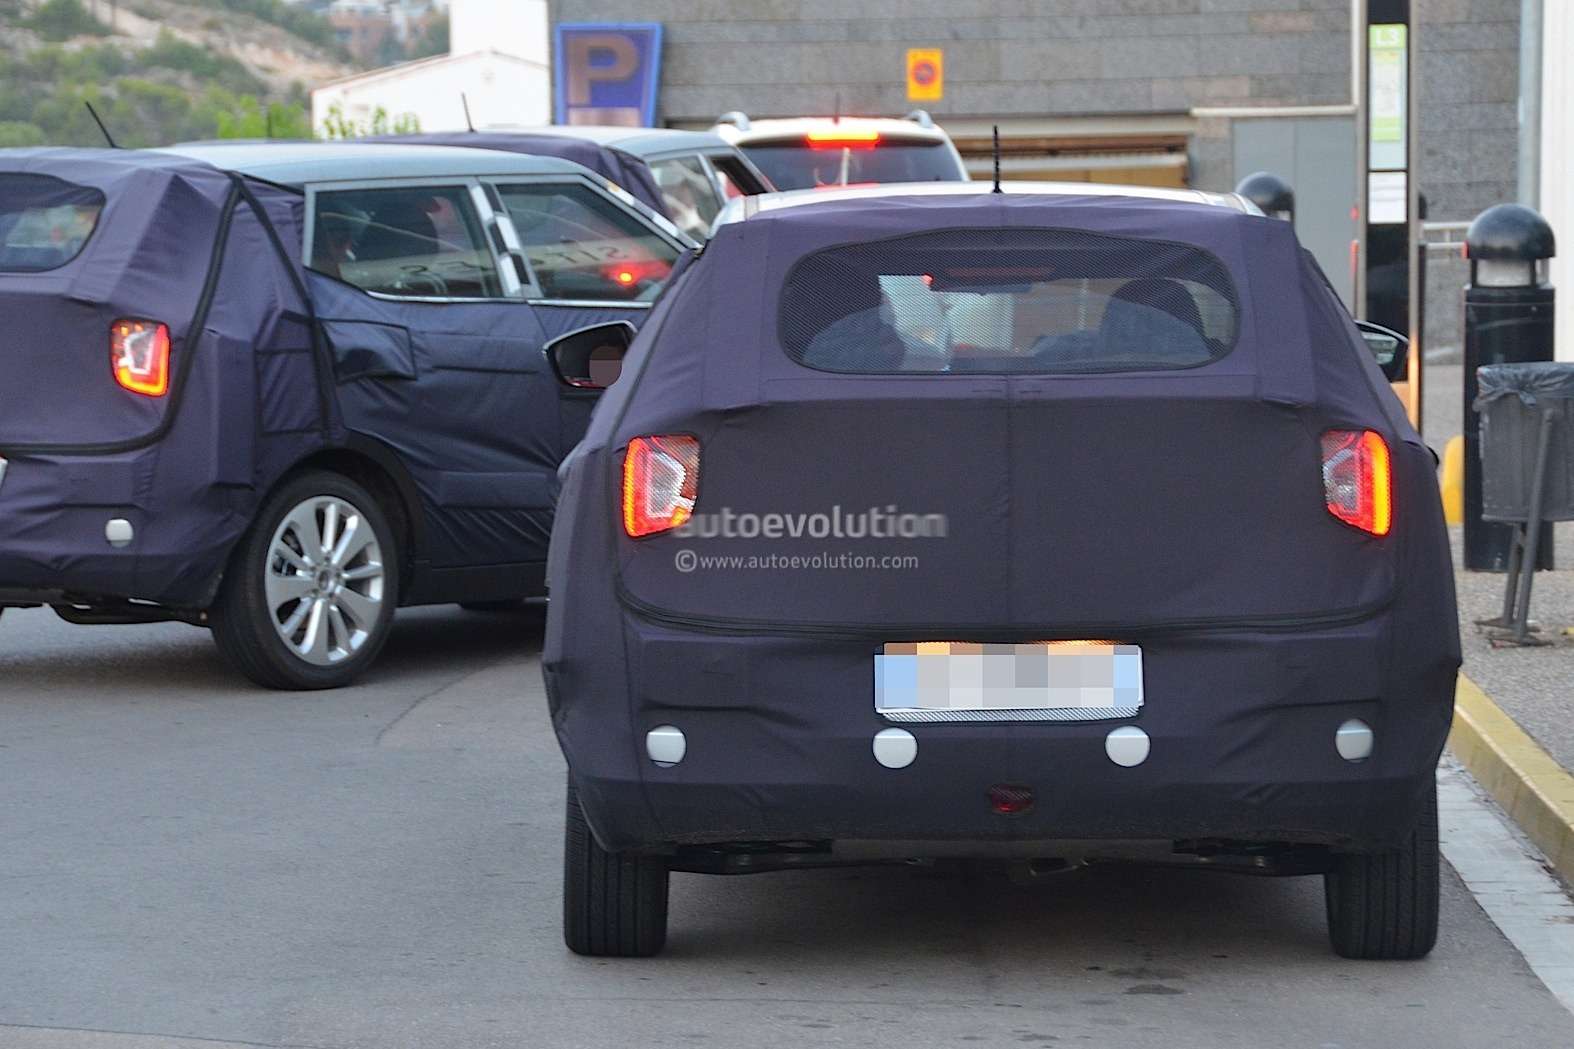 ssangyong-x100-prototype-spied-testing-in-europe-photo-gallery_1